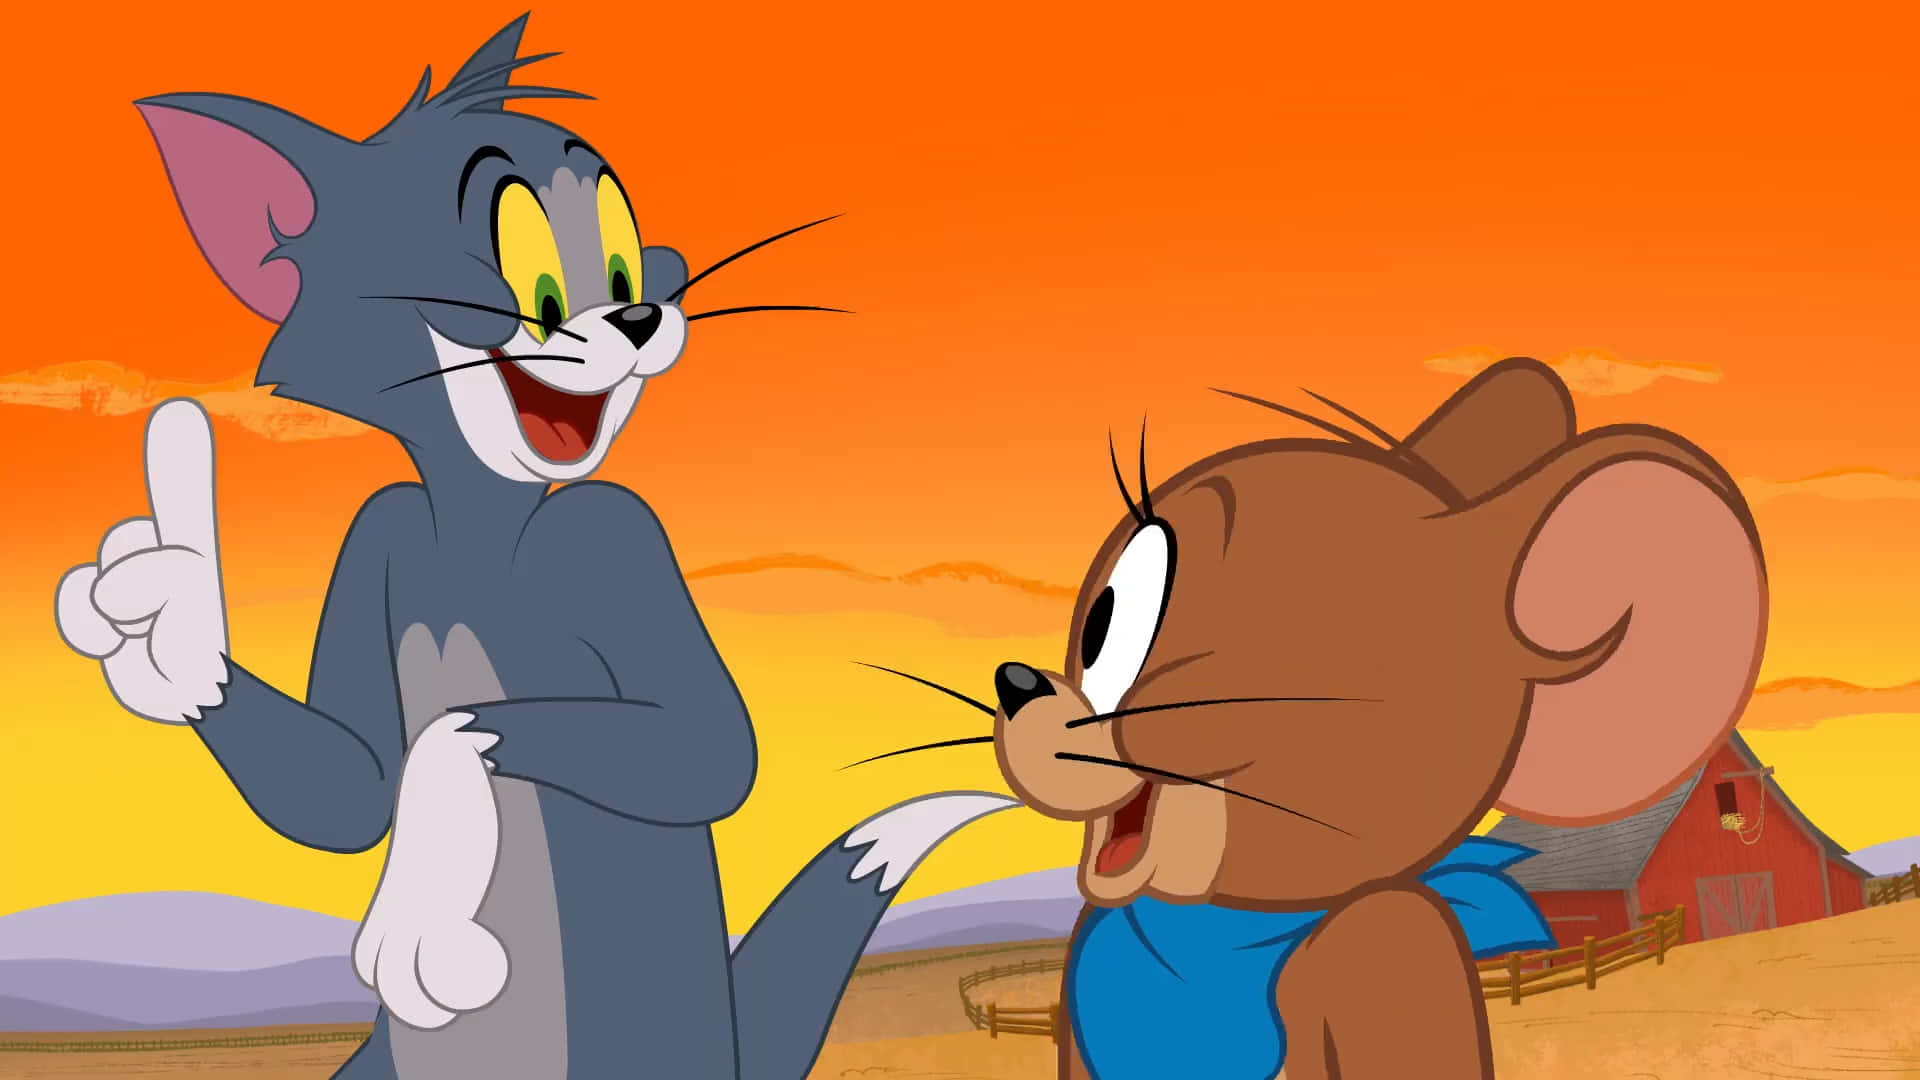 "Tom and Jerry's endless cat and mouse game"